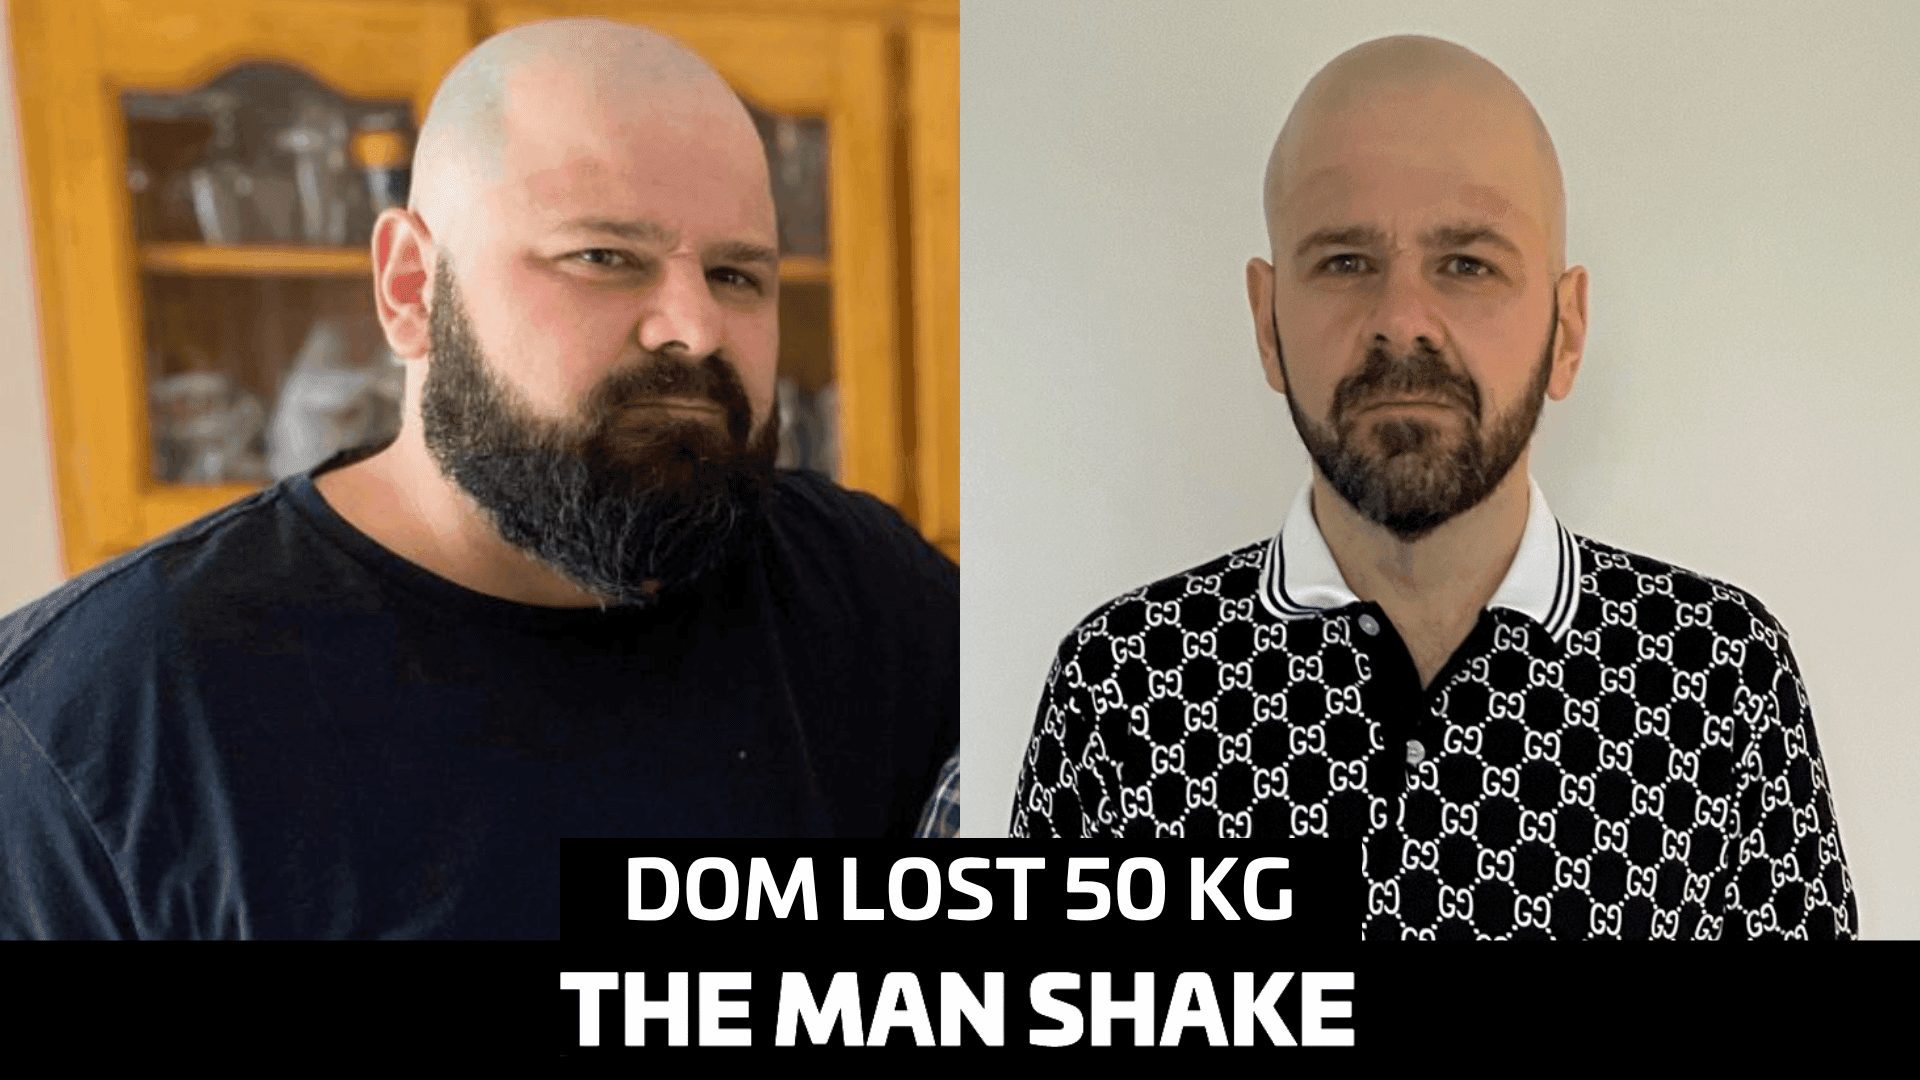 Dom overcame his pain and lost 50kg for his family!